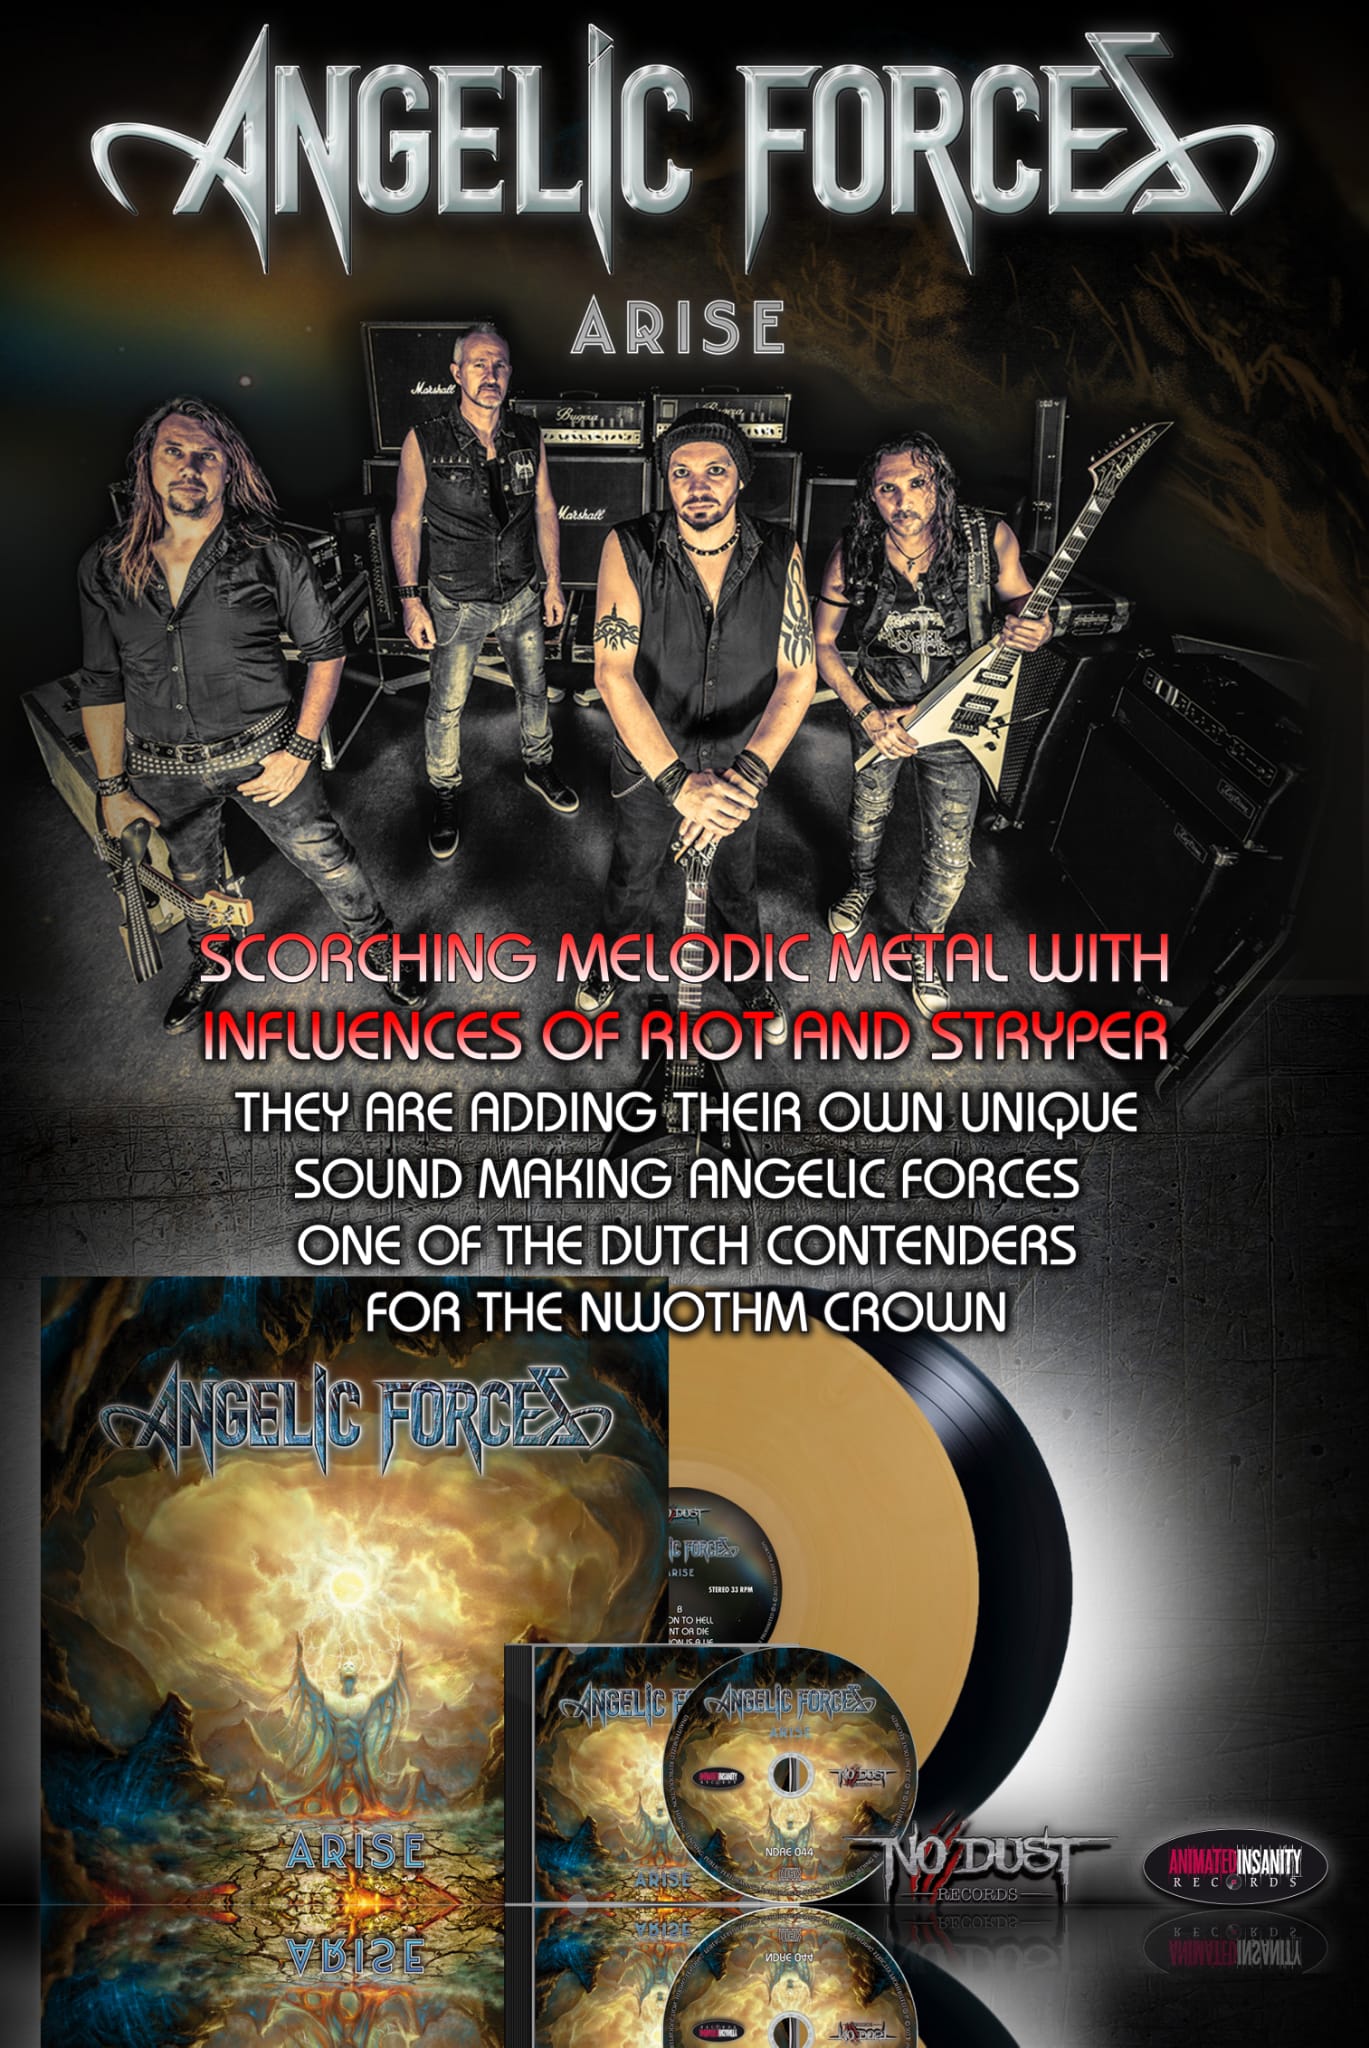 Angelic Forces - Arise album coming soon!

Scorching melodic metal with influences of Riot and Stryper